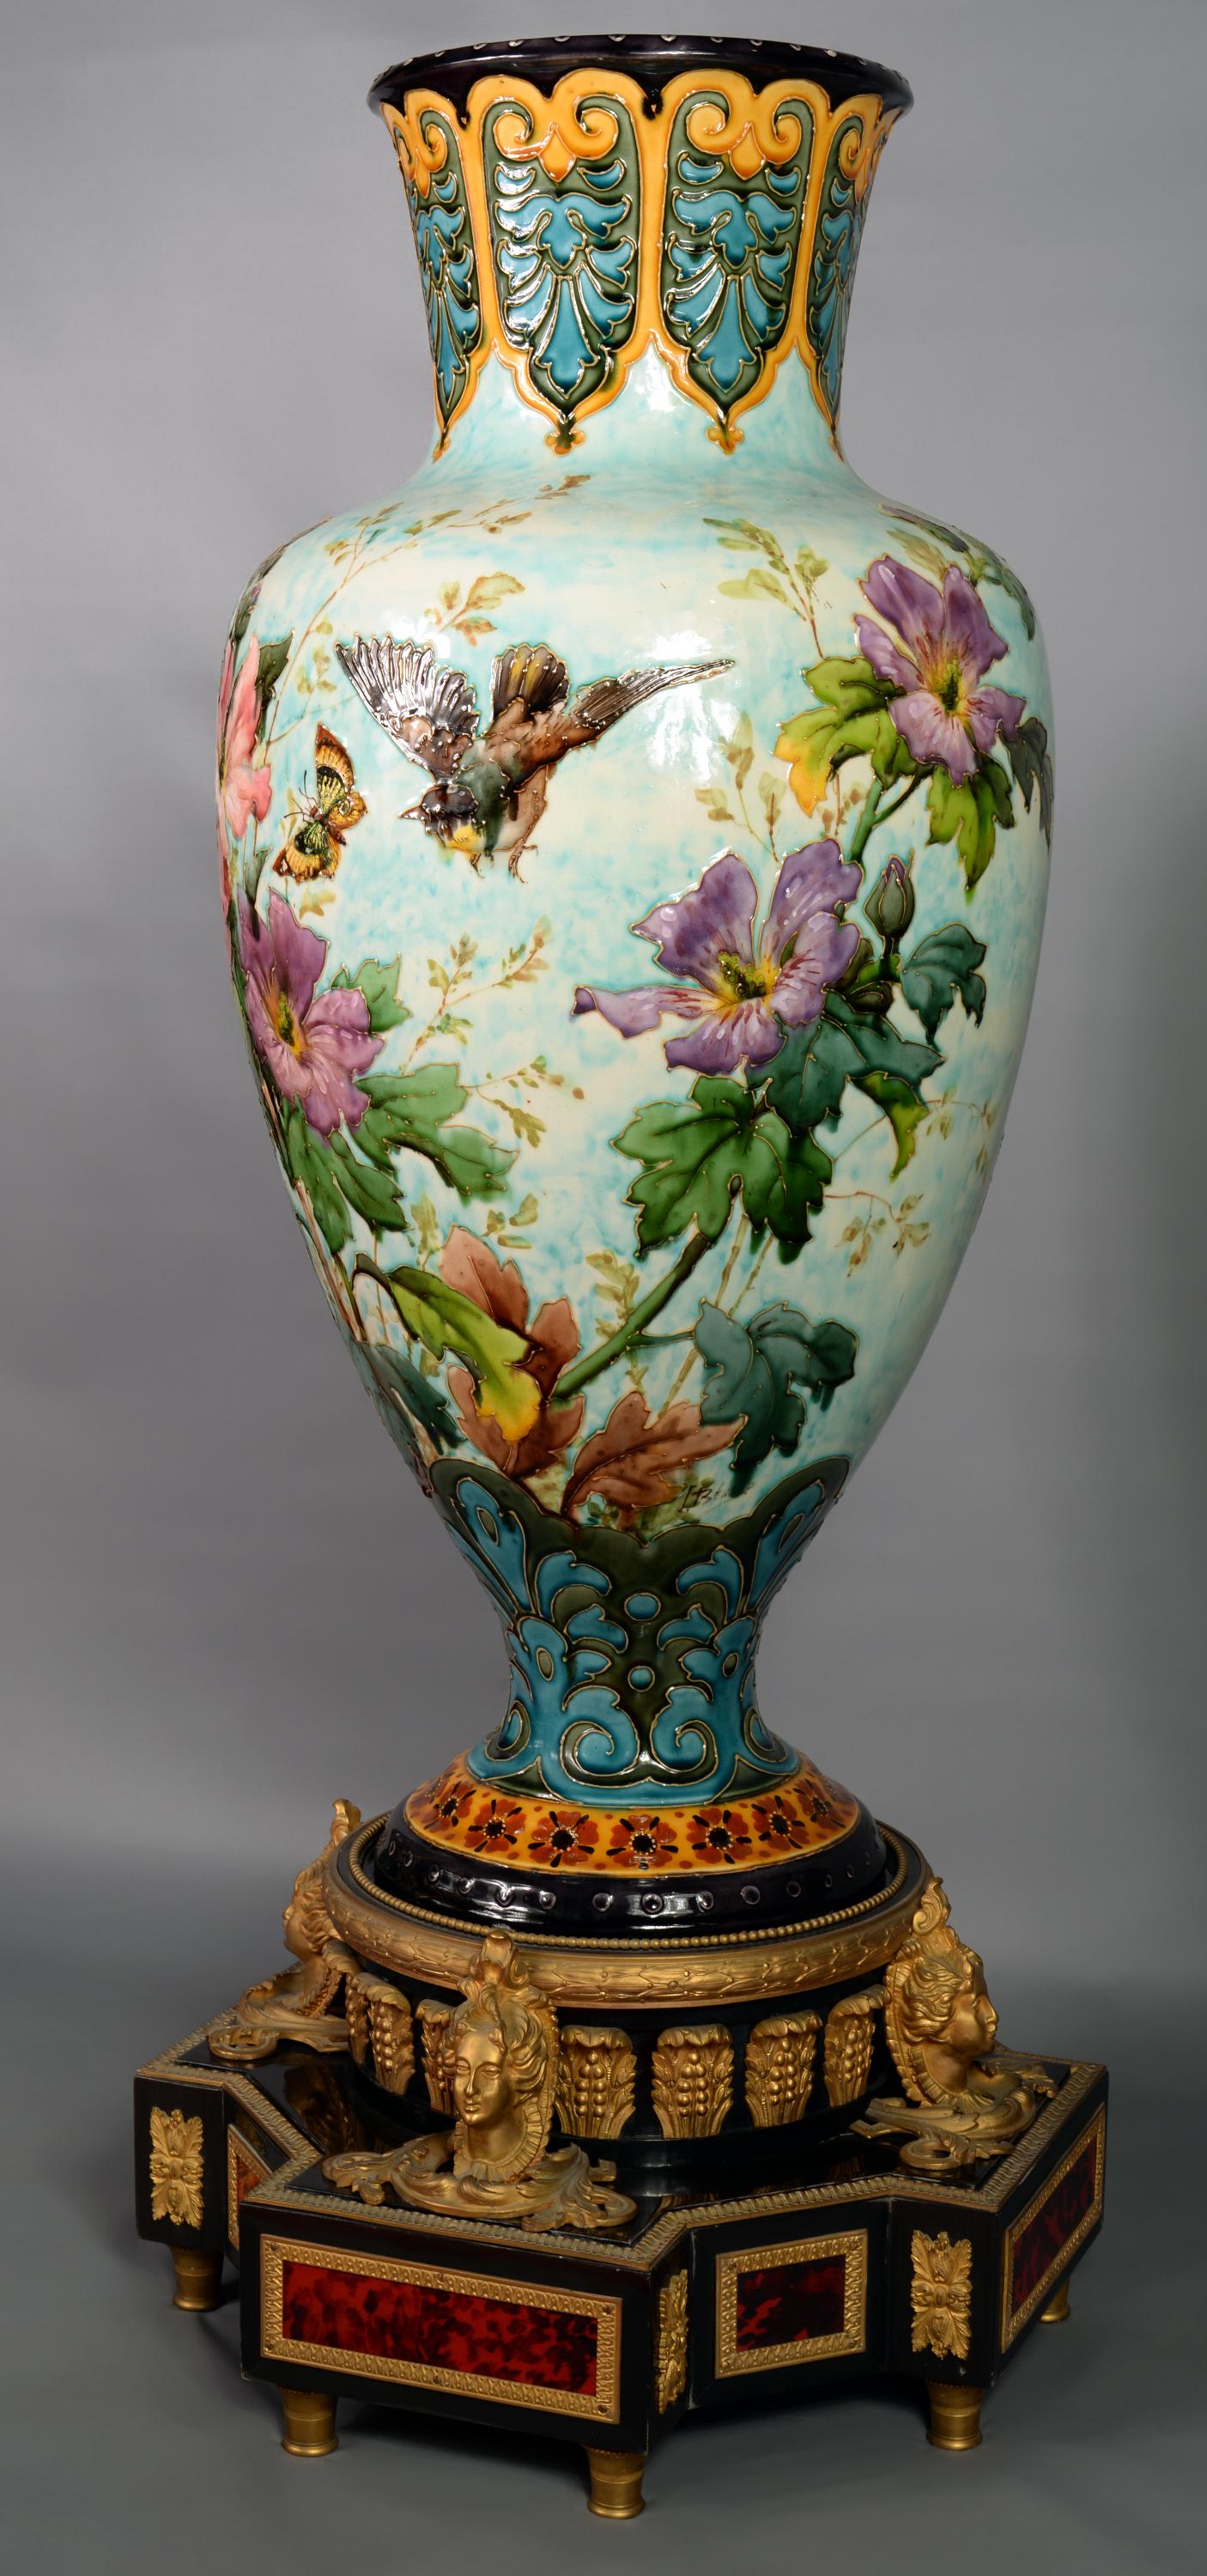 This exceptional baluster vase, important because of its size, was made of porcelain in the second half of the 19th century.
It is adorned with a very beautiful enameled and polychromatic decoration in the pure Napoleon III taste depicting flowers